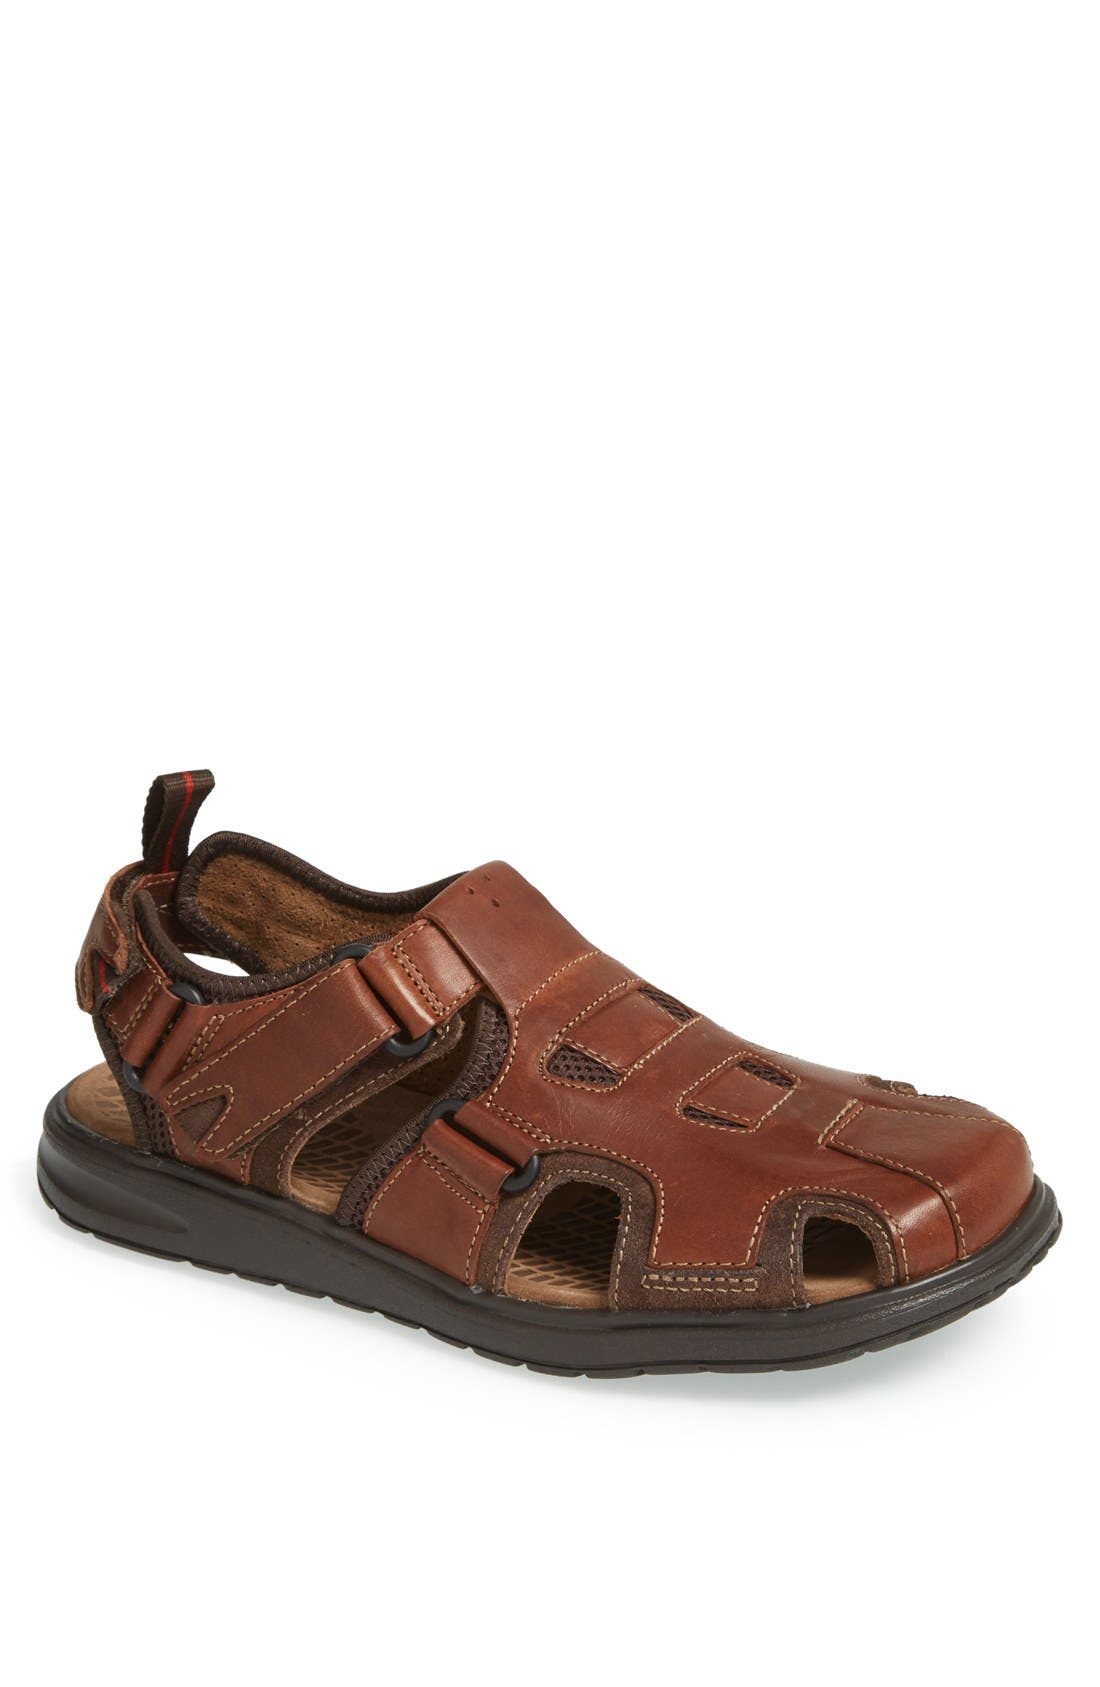 clarks mens casual valor sky leather sandals